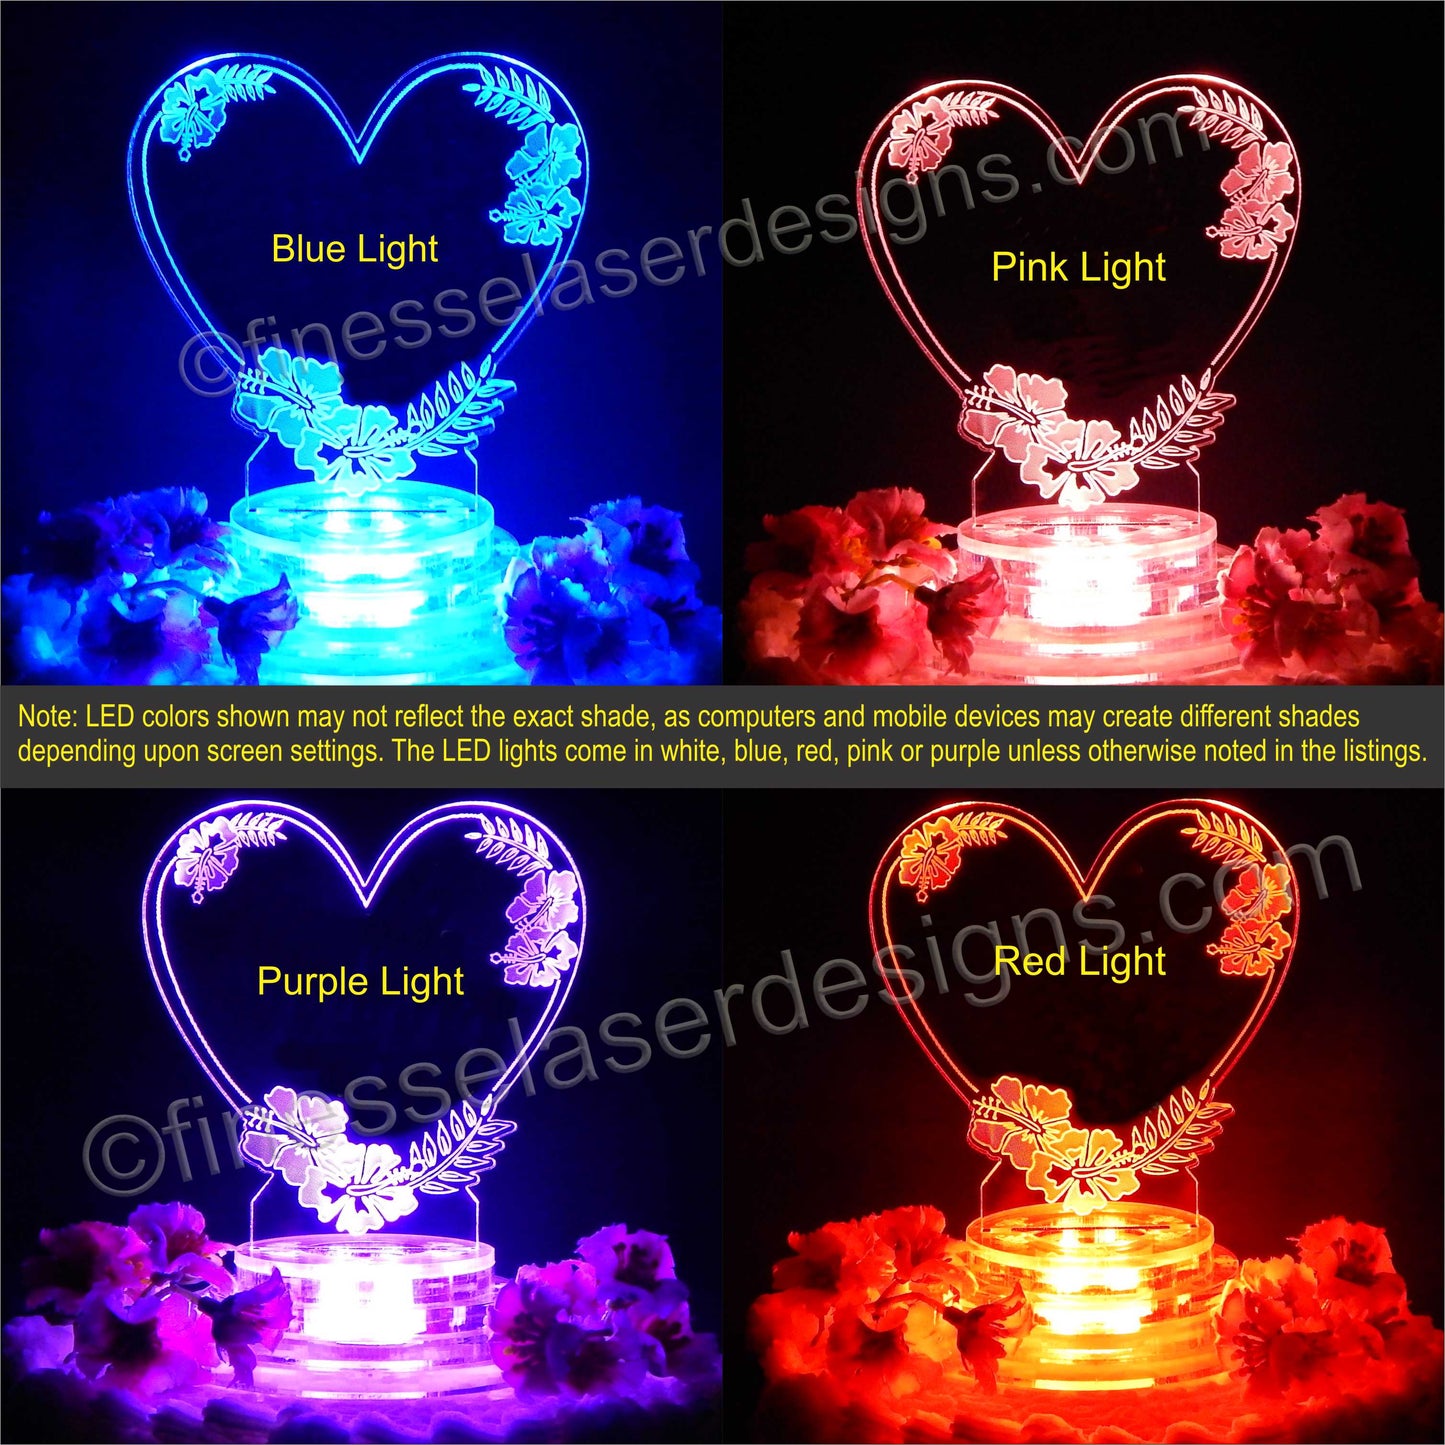 colored light view showing a heart shaped acrylic cake topper with an hibiscus flower design shown in blue, pink, purple and red lighting